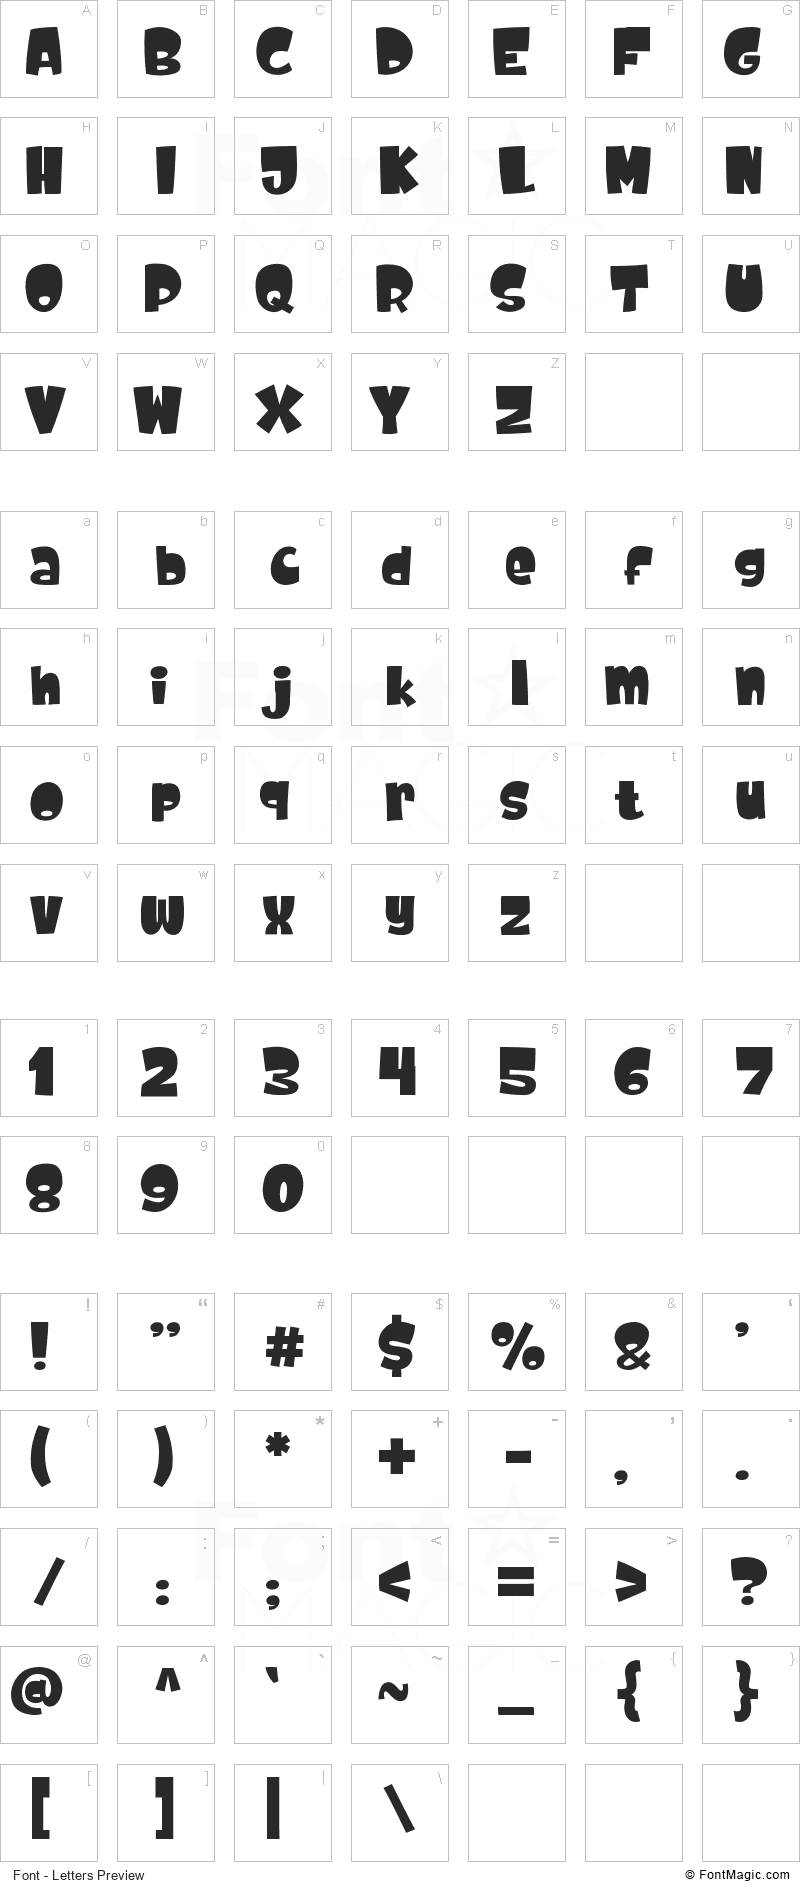 Cute Dolphin Font - All Latters Preview Chart